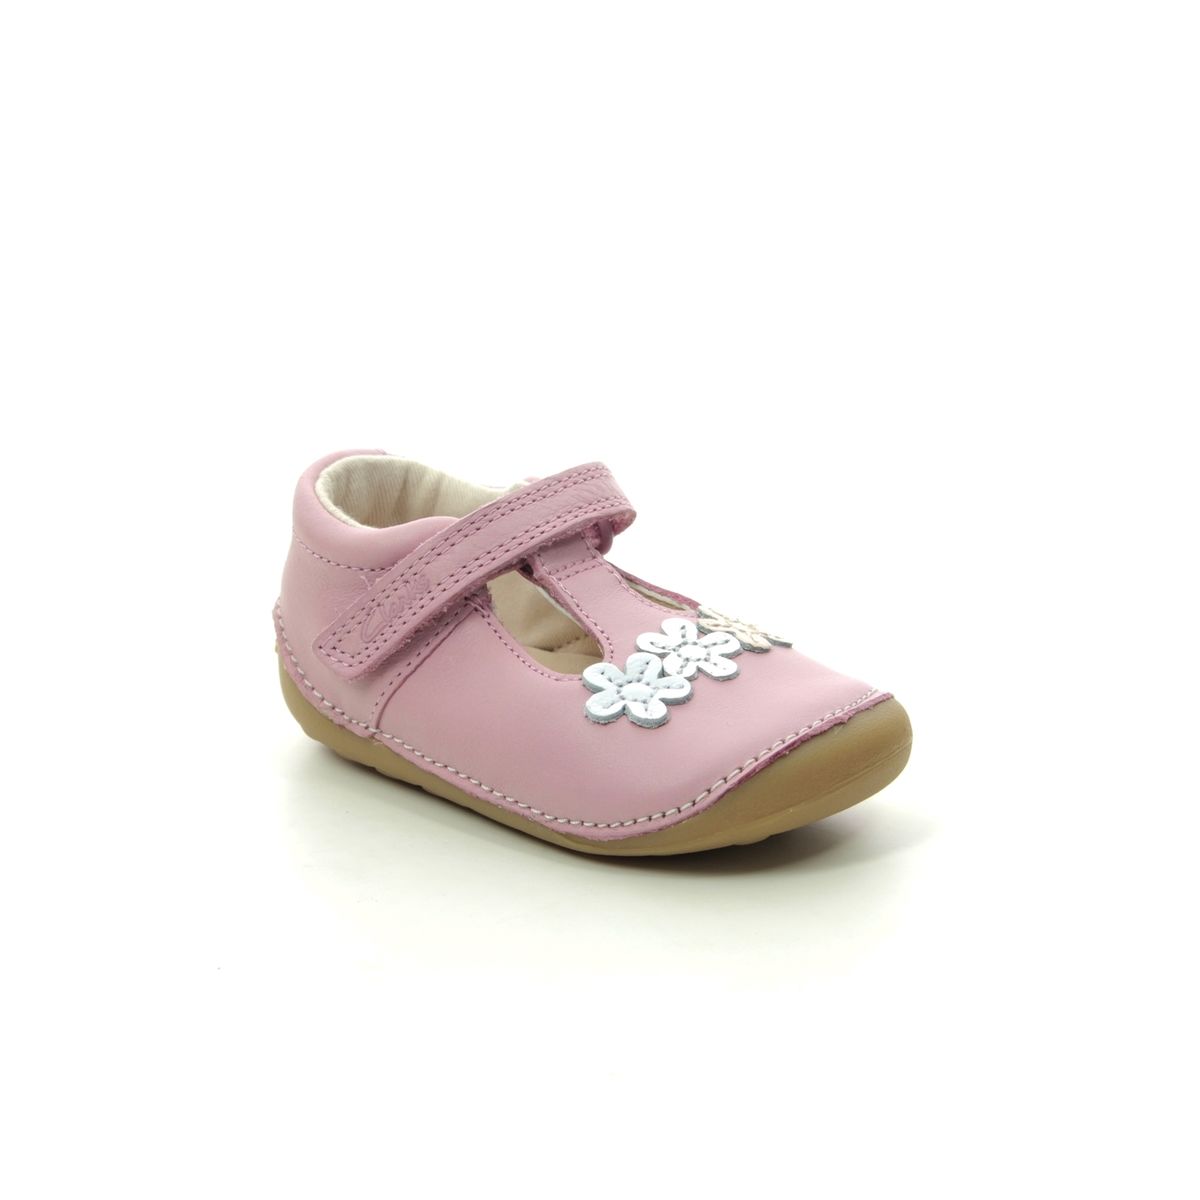 Cape Ithaca ego Clarks Tiny Sun T G Fit Pink Leather girls first and baby shoes